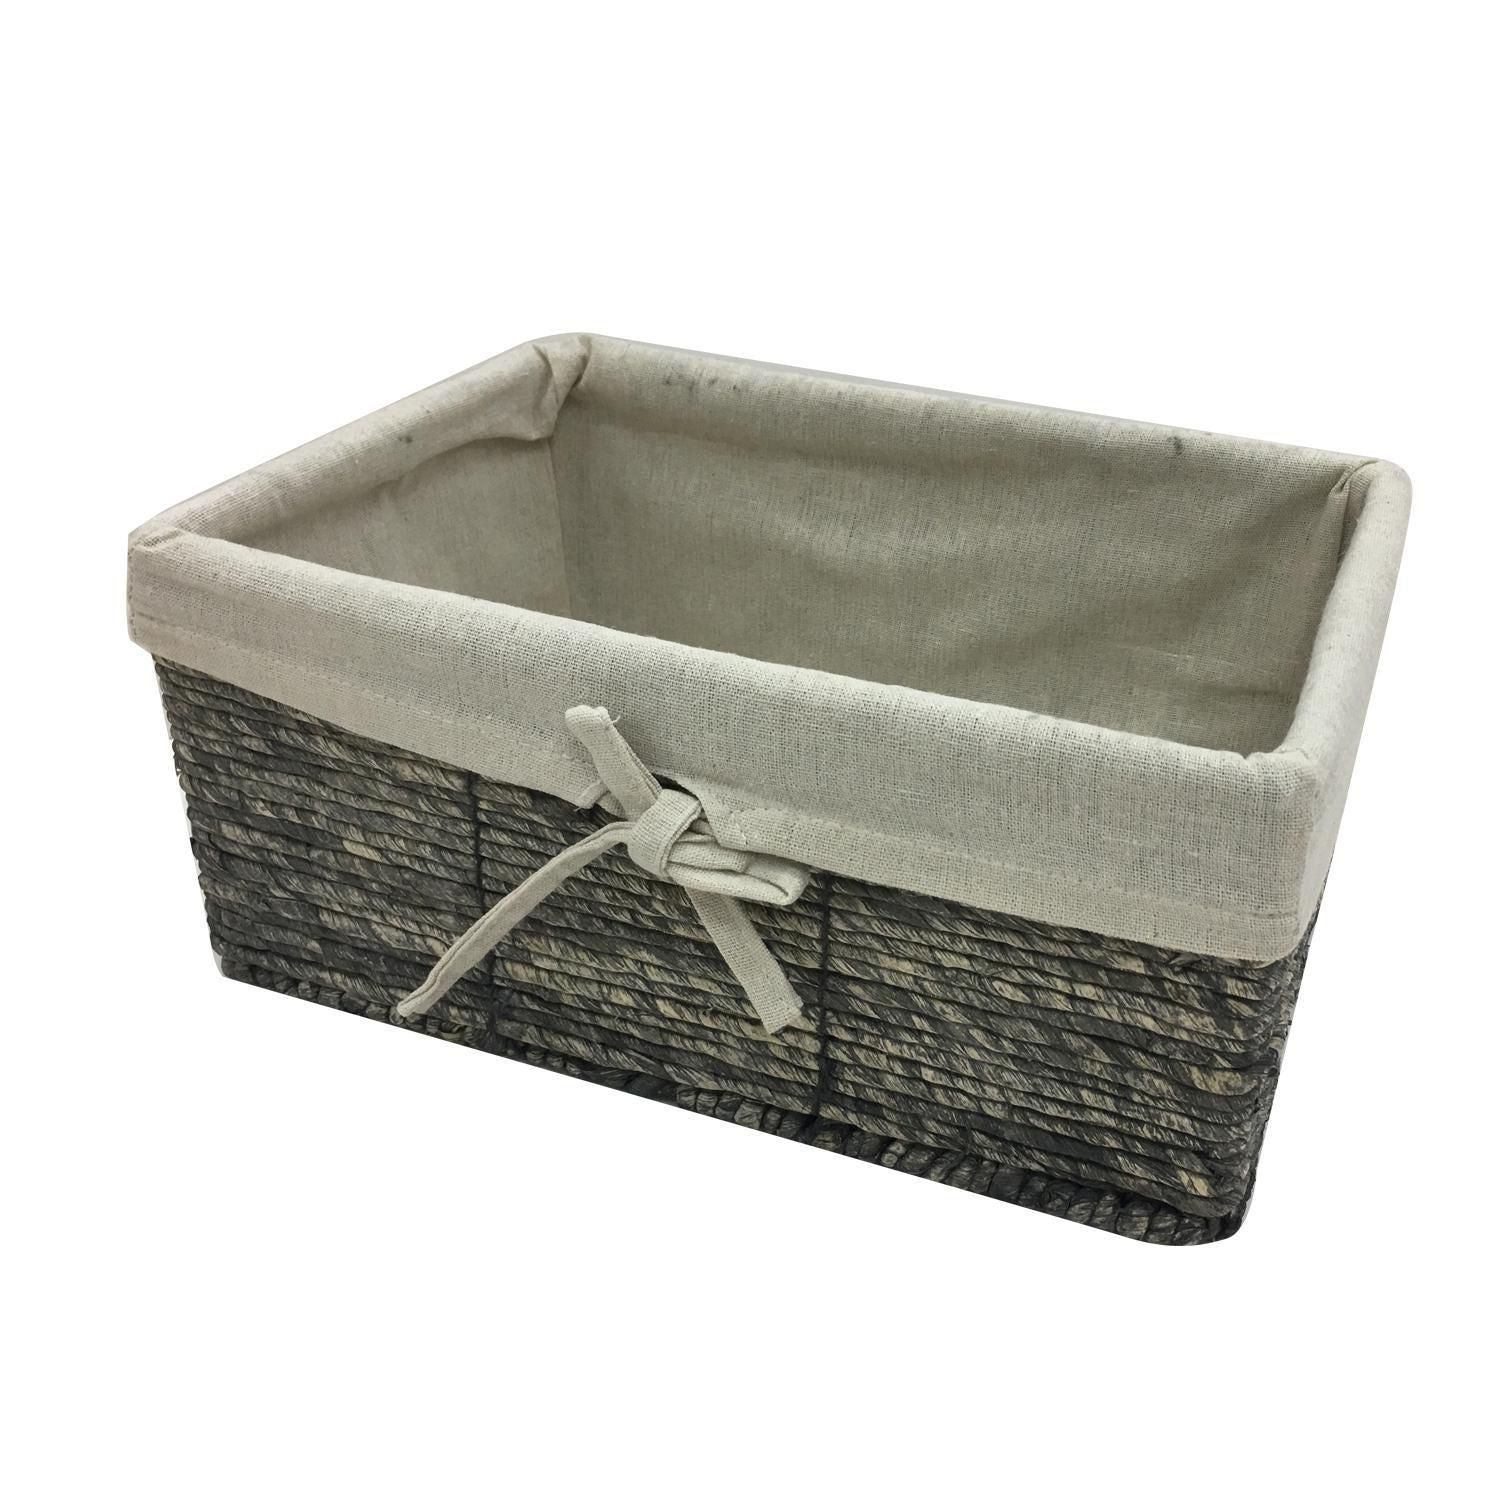 Hometrends Maize Basket With Liner